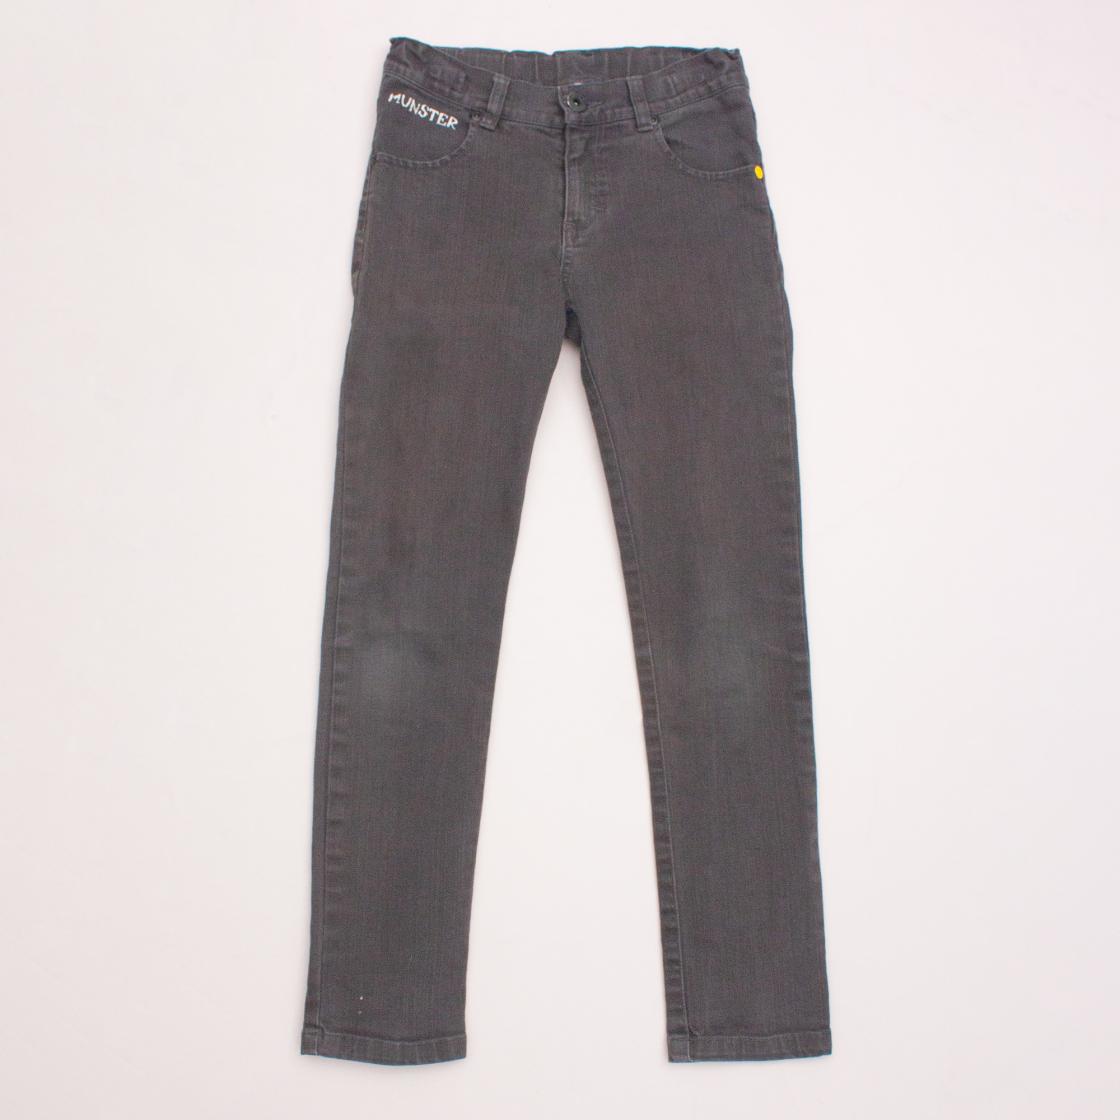 Munster Charcoal Jeans